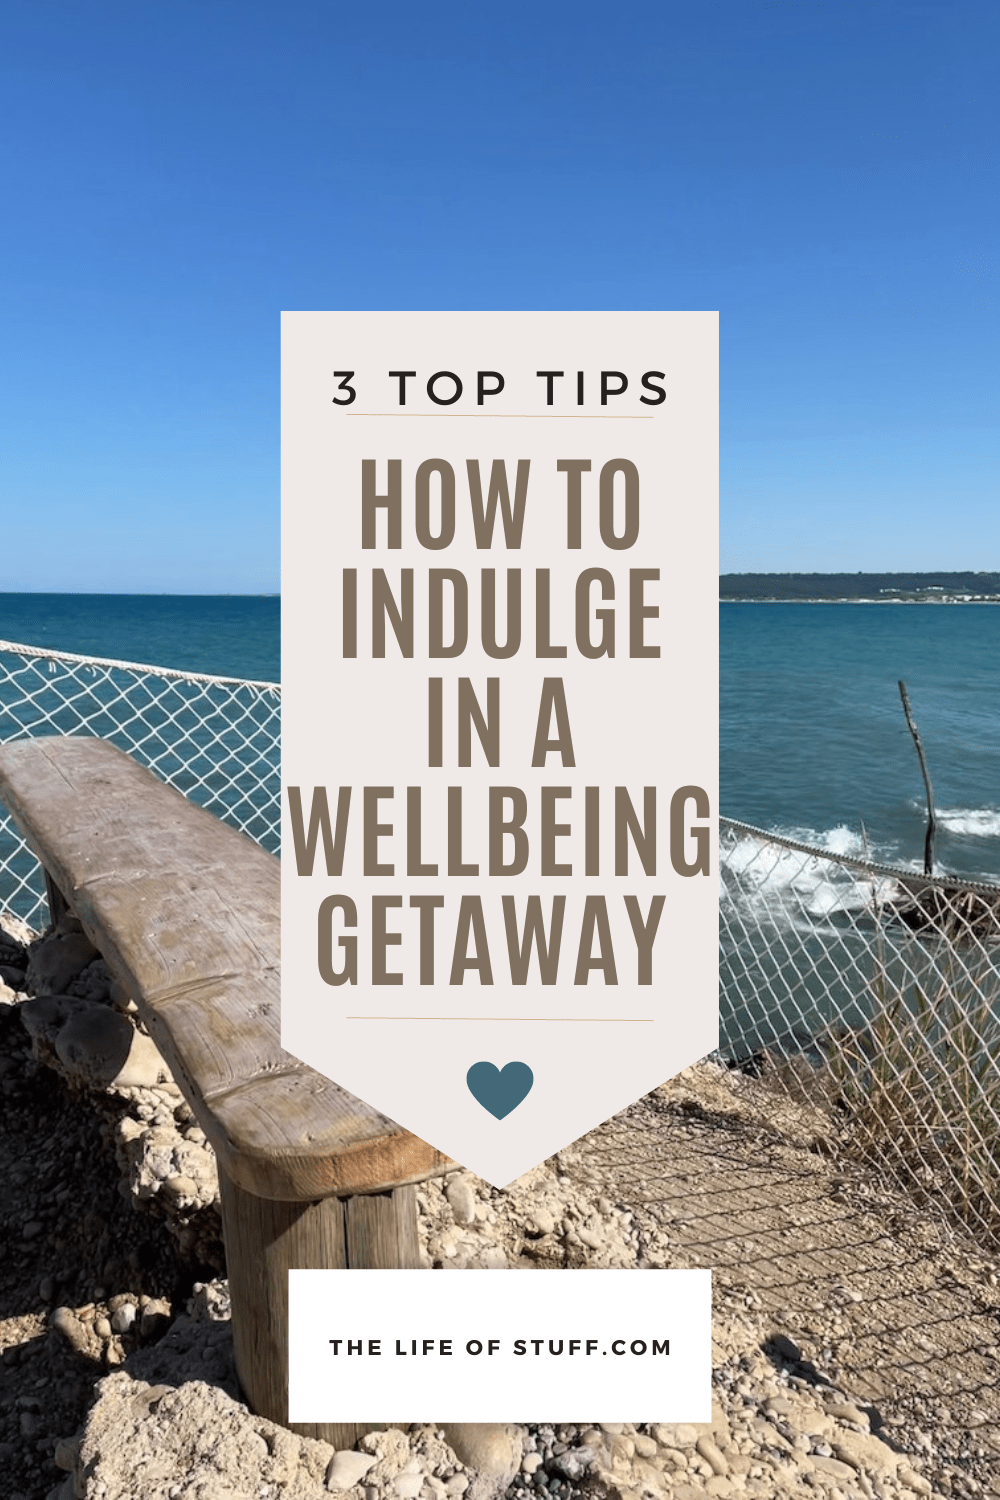 3 Top Tips on How to Indulge in a Wellbeing Getaway - The Life of Stuff